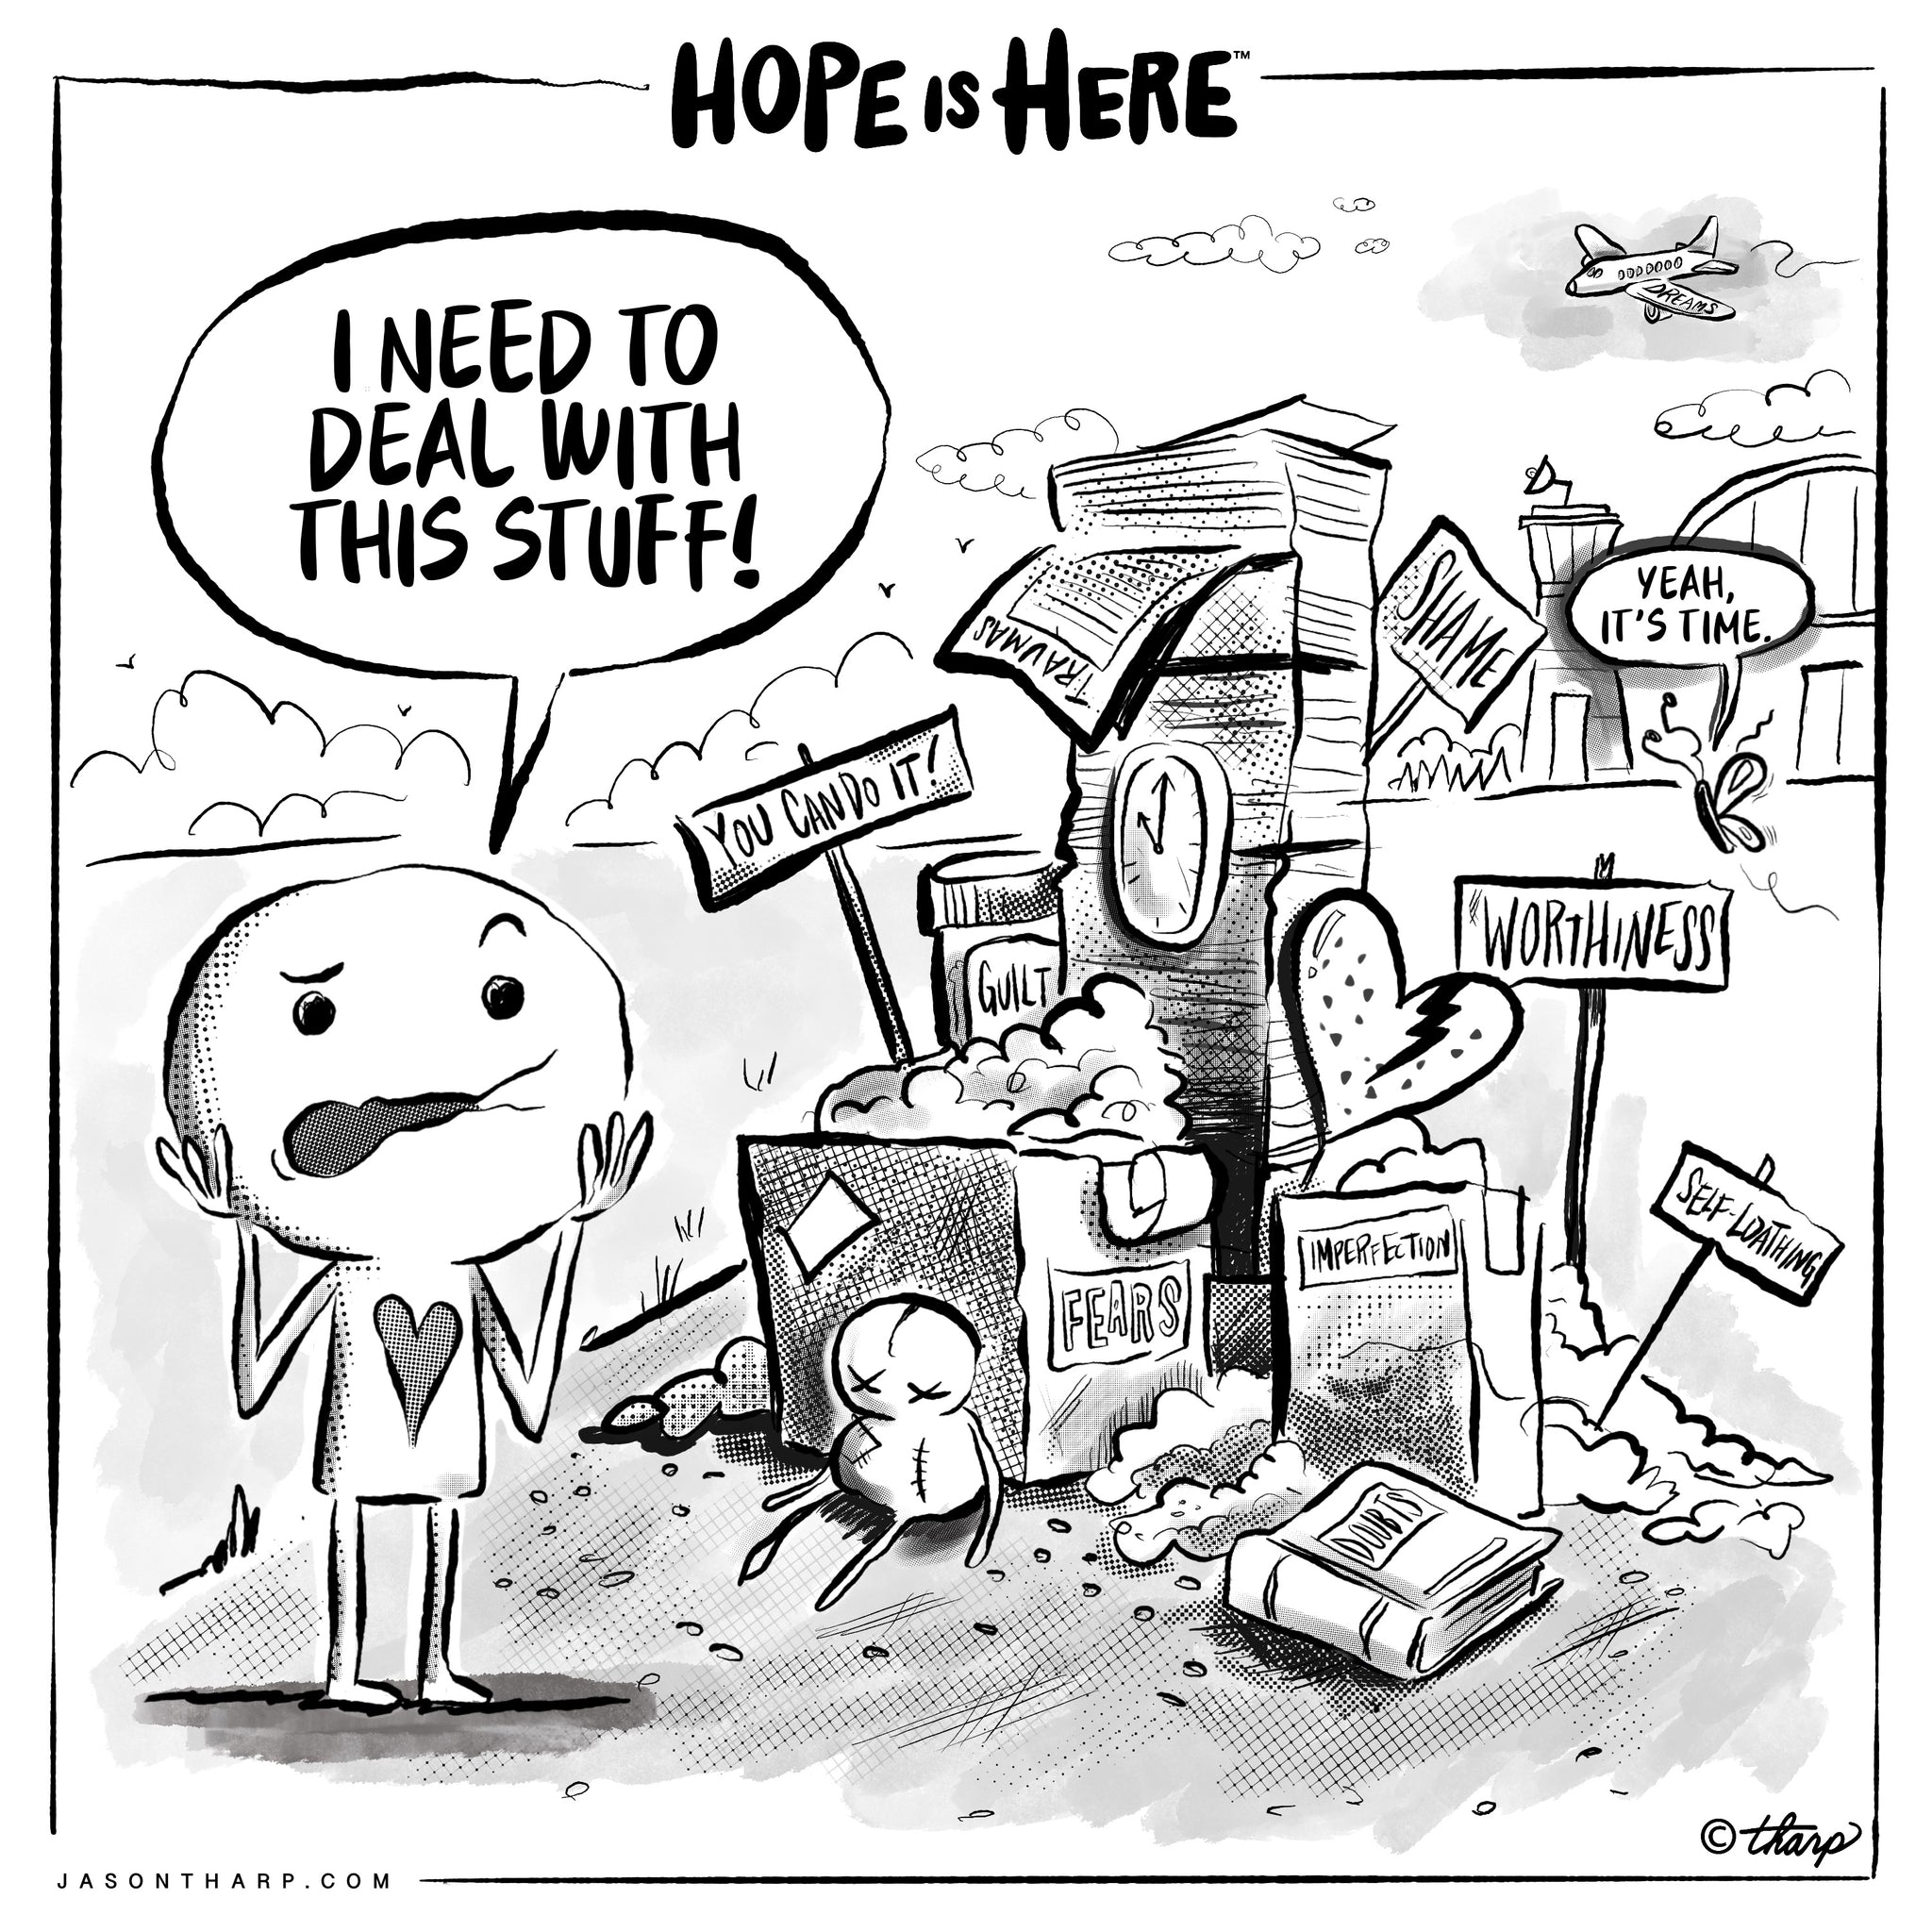 Beyond Hope Project, Hope is Here comic about clearing the runway for life